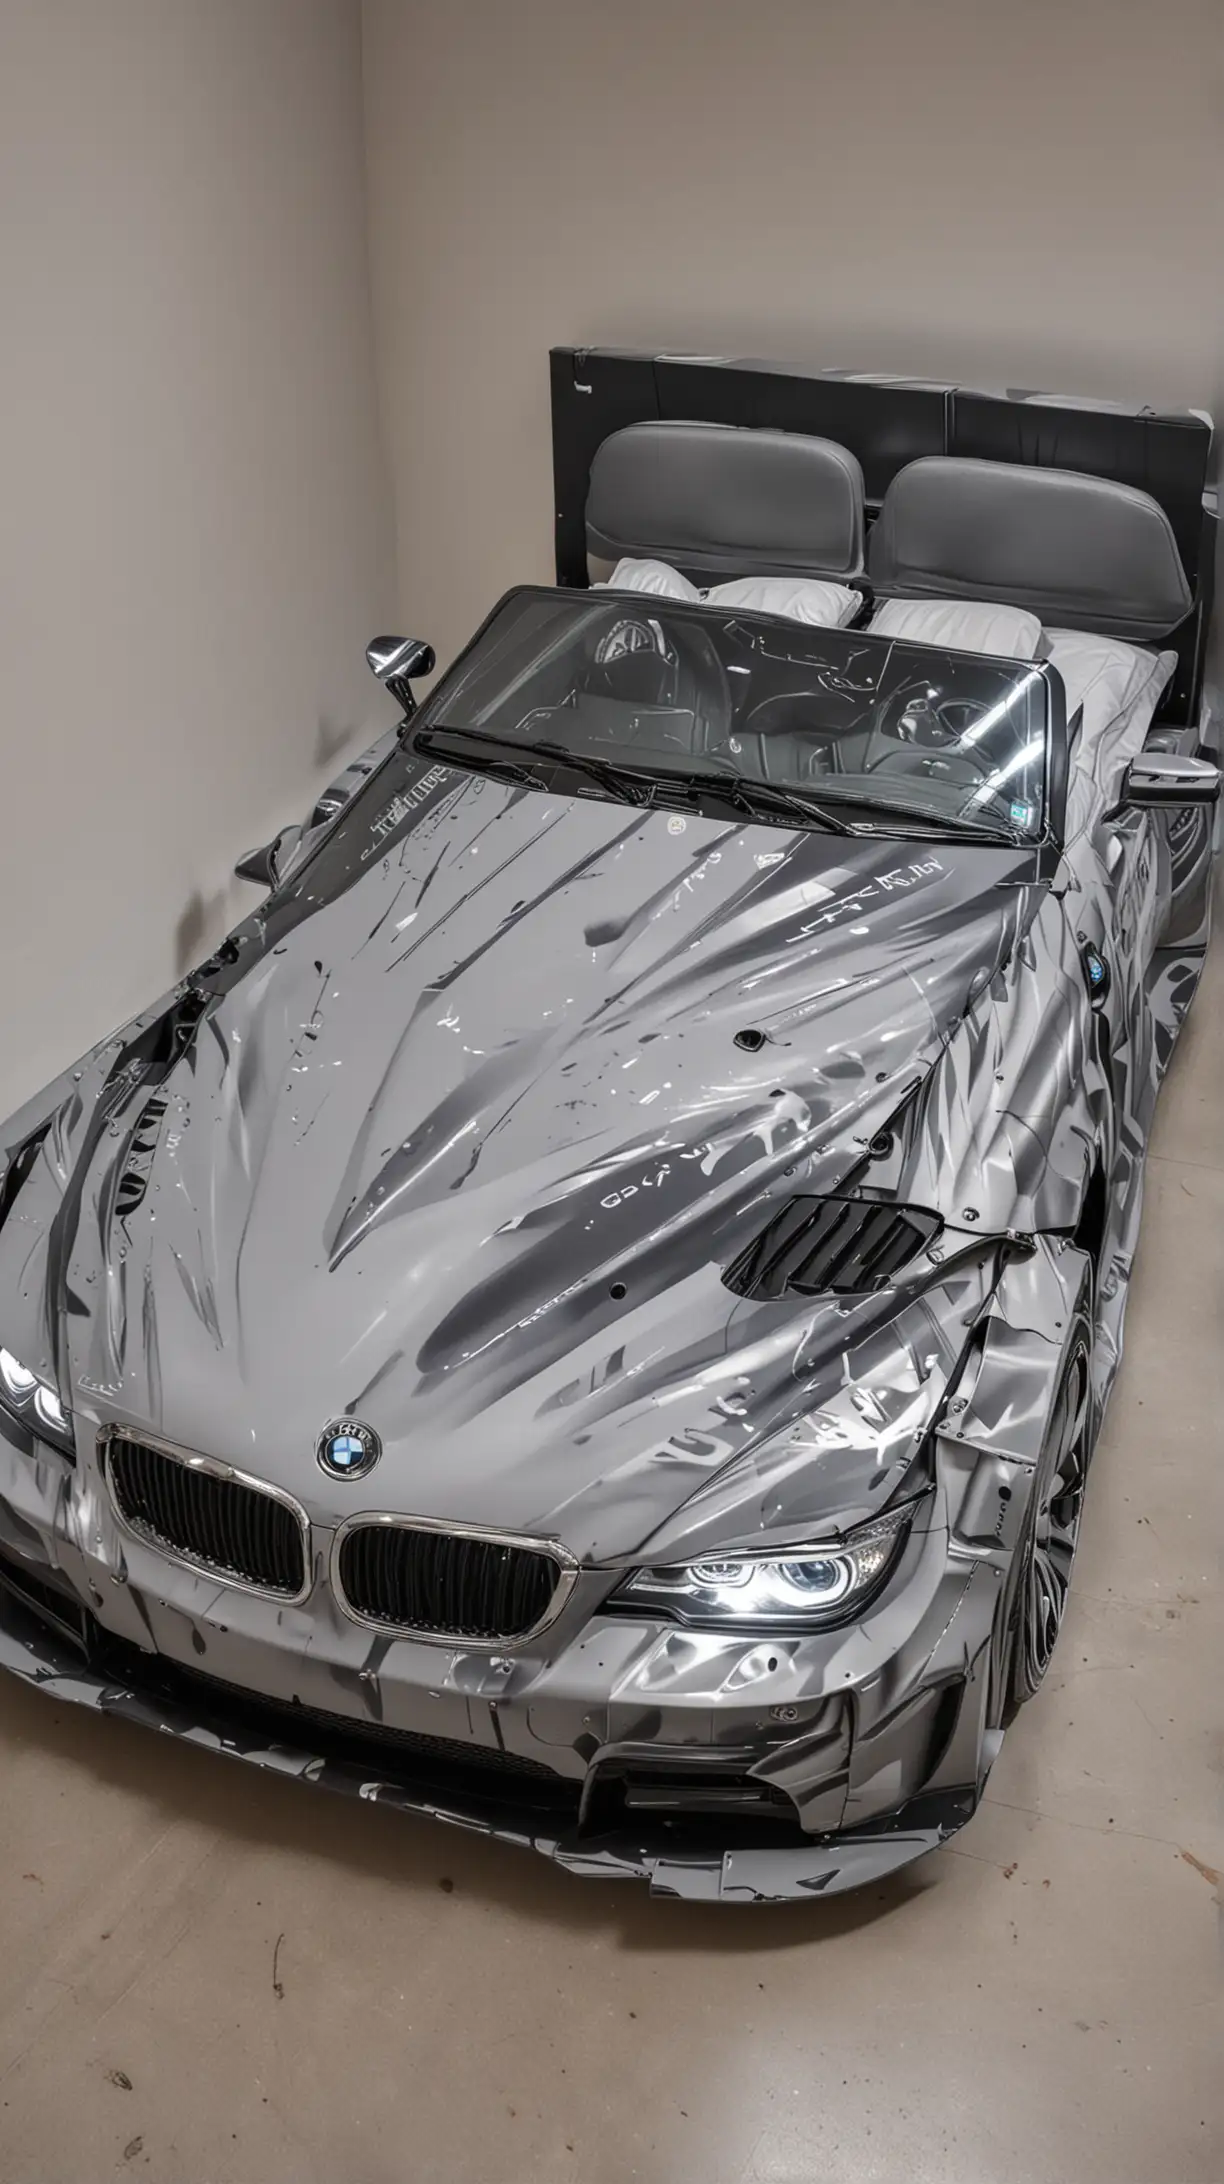 Luxurious BMW CarShaped Double Bed with Graffiti Art and Illuminated Headlights